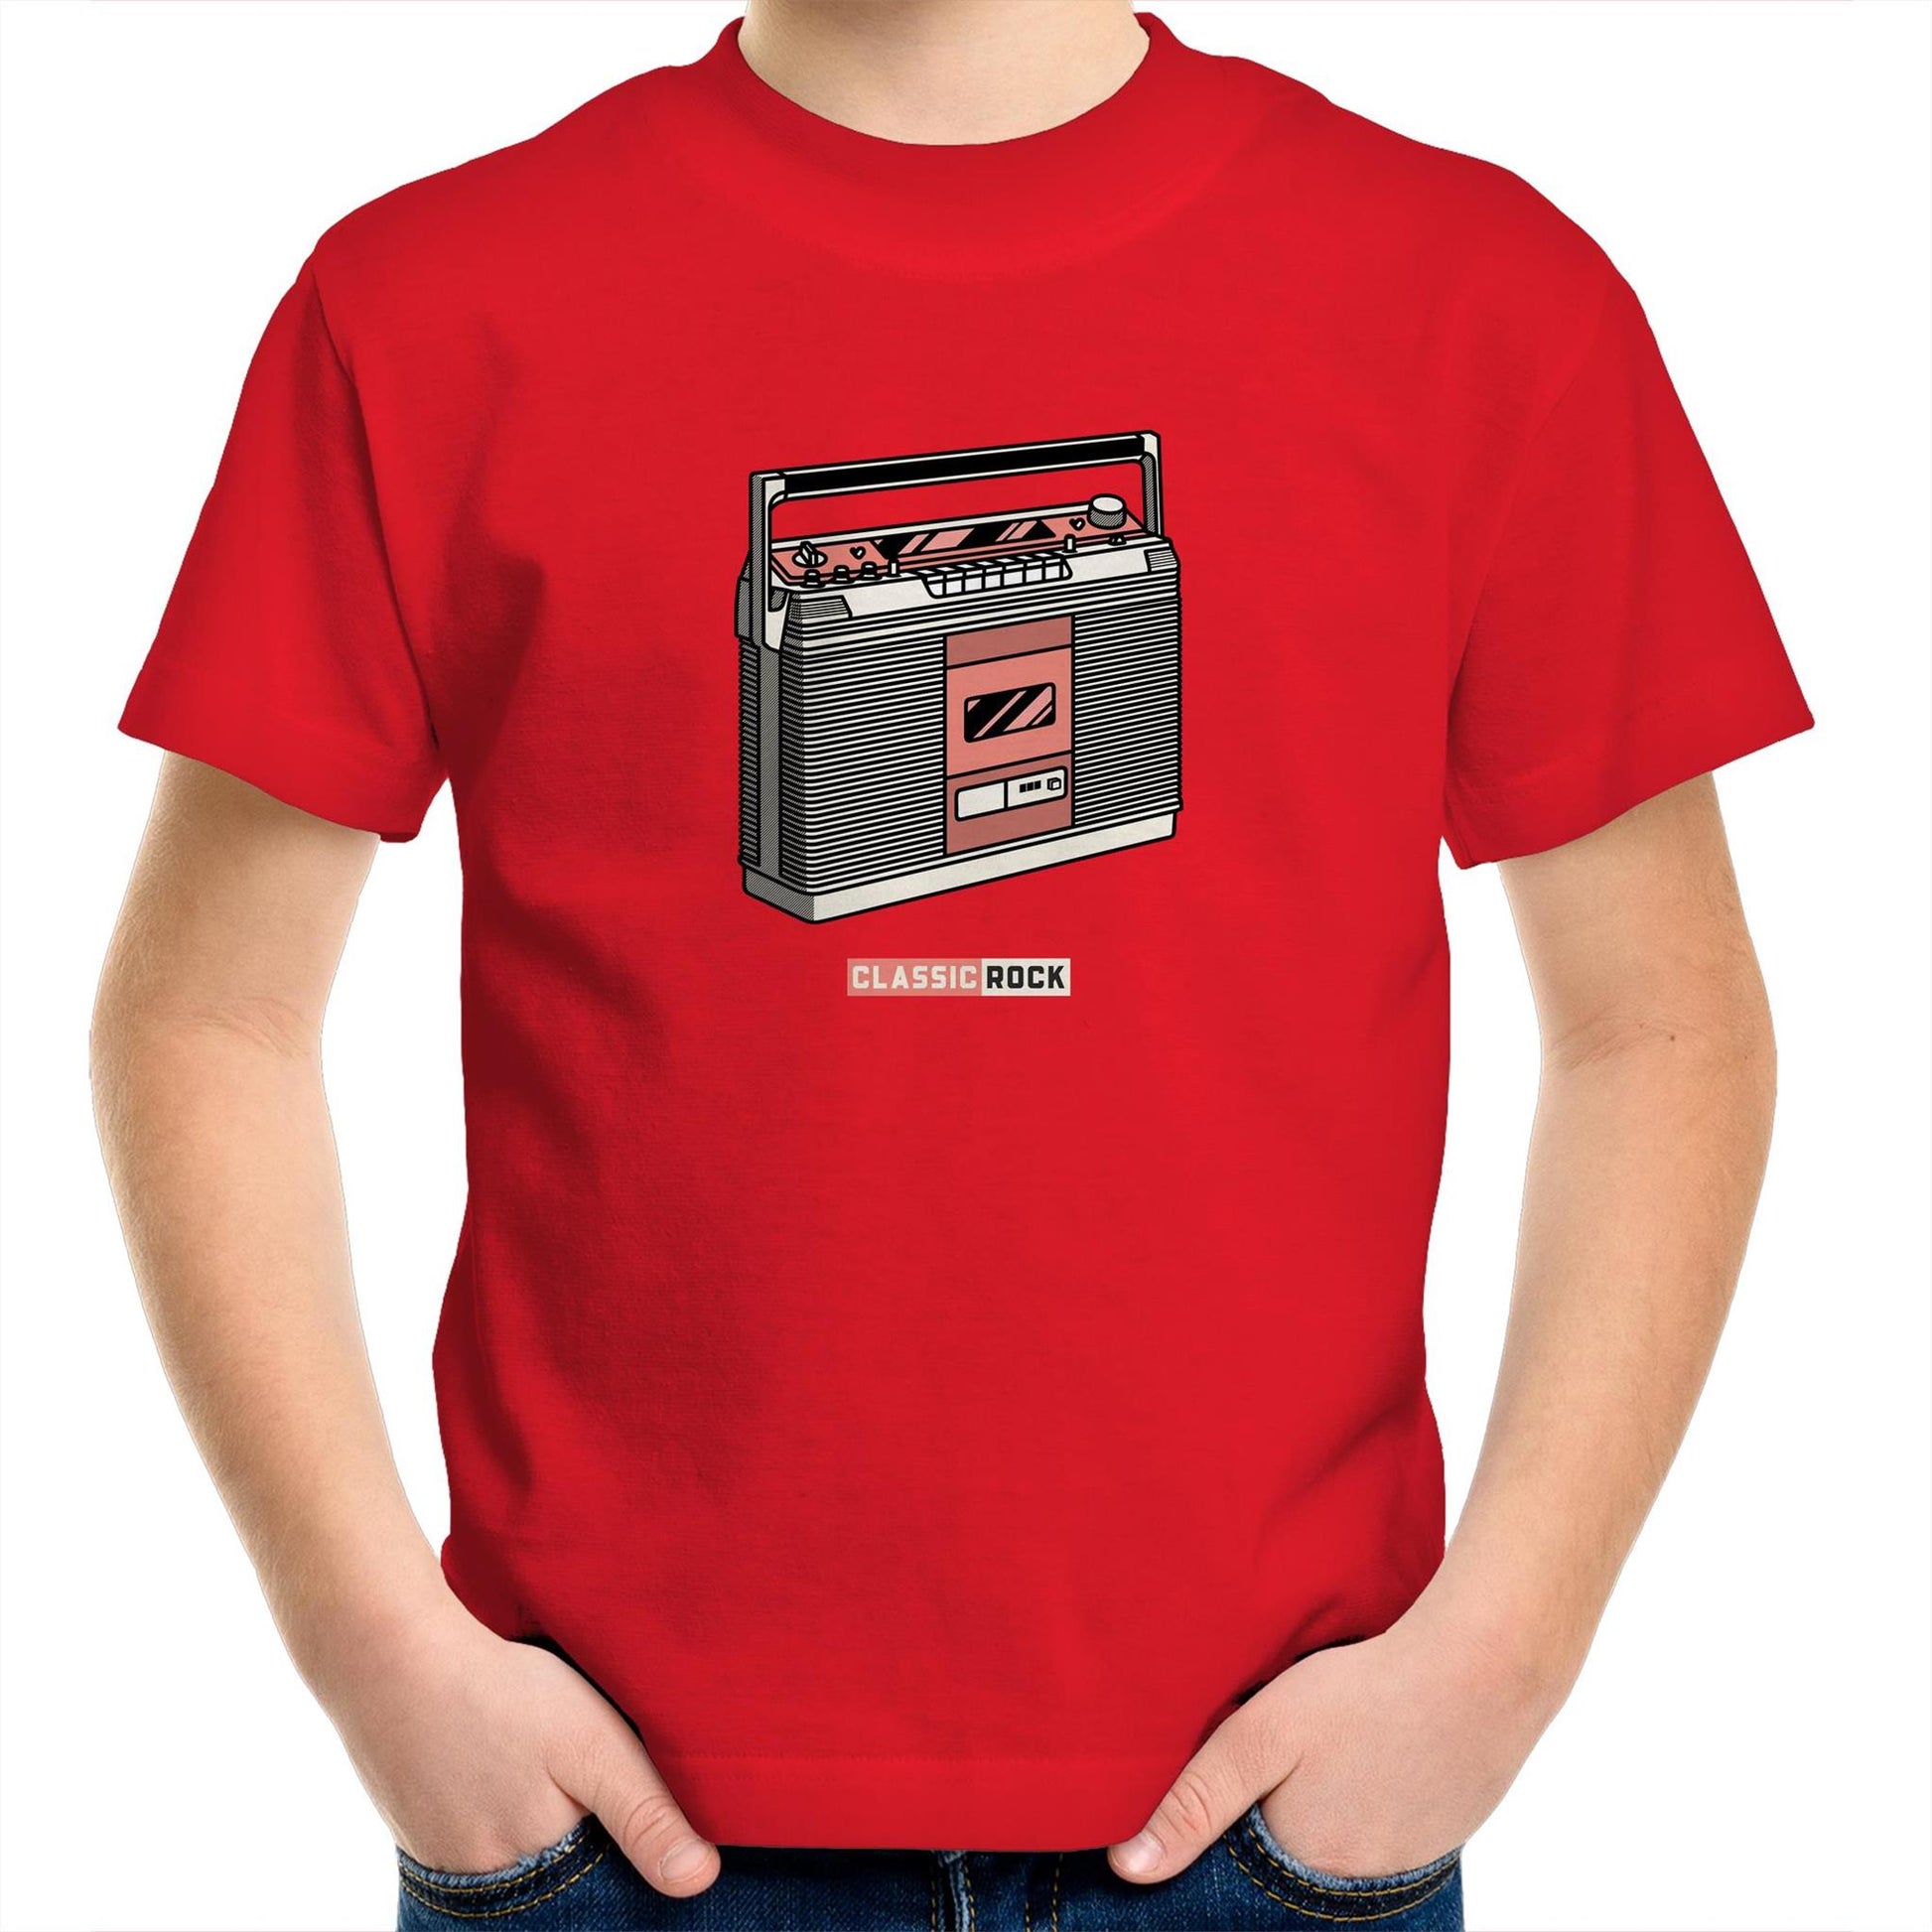 Classic Rock, Cassette Player Kids Youth Crew T-Shirt Red Kids Youth T-shirt Music Retro